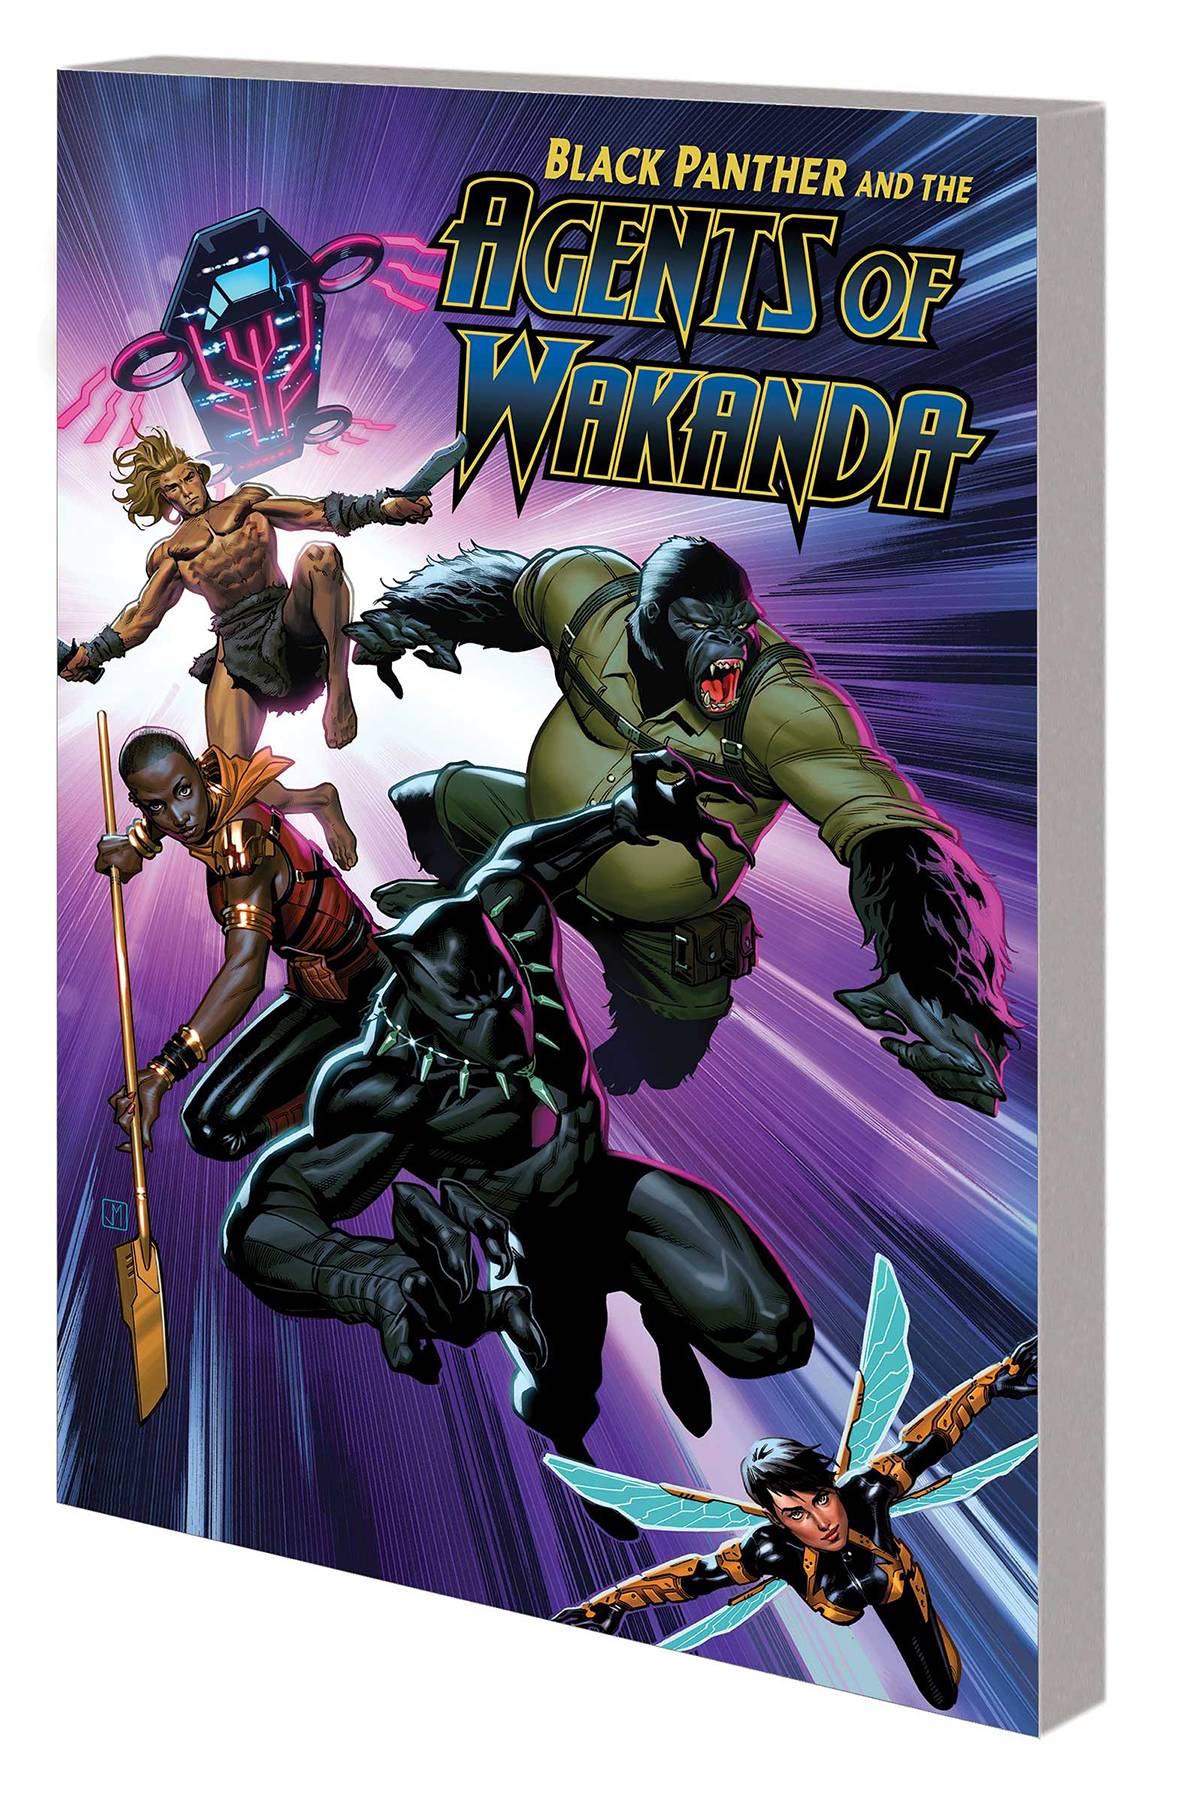 BLACK PANTHER AGENTS OF WAKANDA TP VOL 01 EYE OF THE STORM